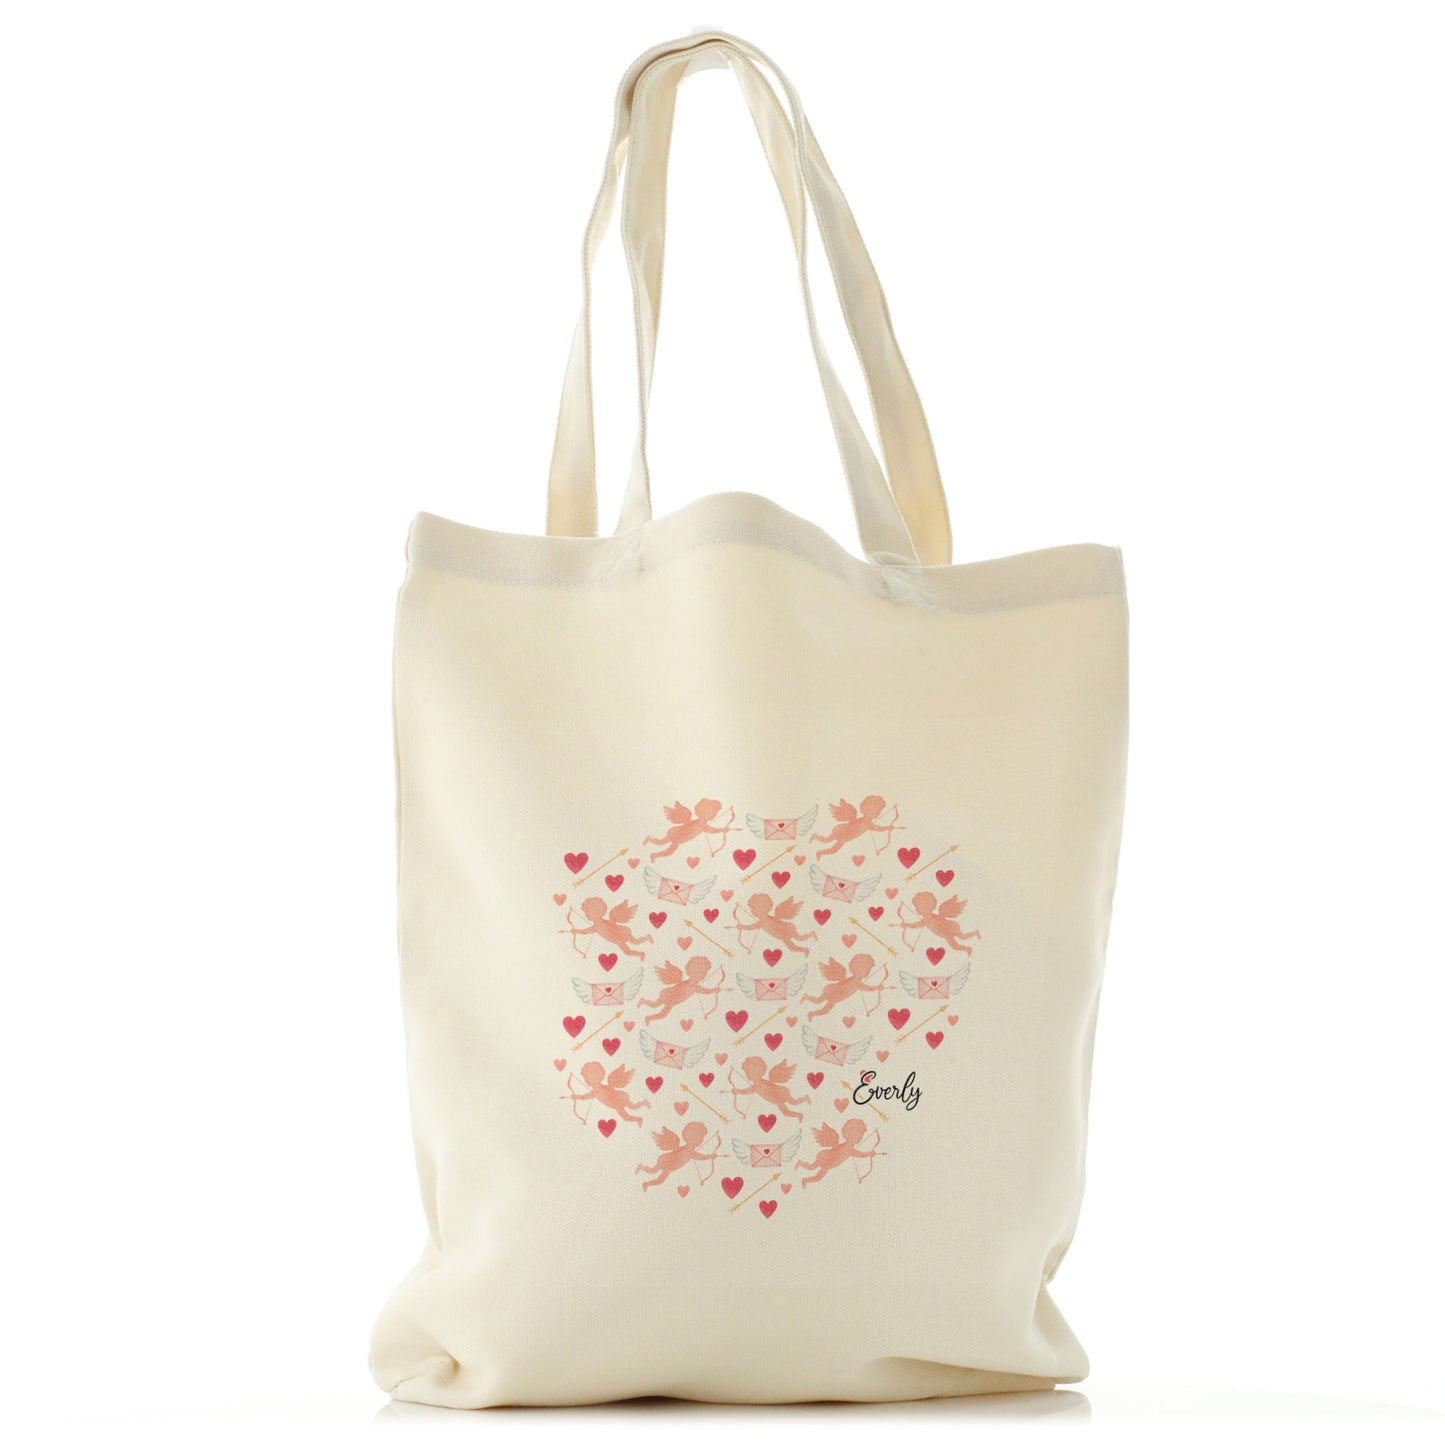 Personalised Canvas Tote Bag with Stylish Text and Cupid Hearts Print